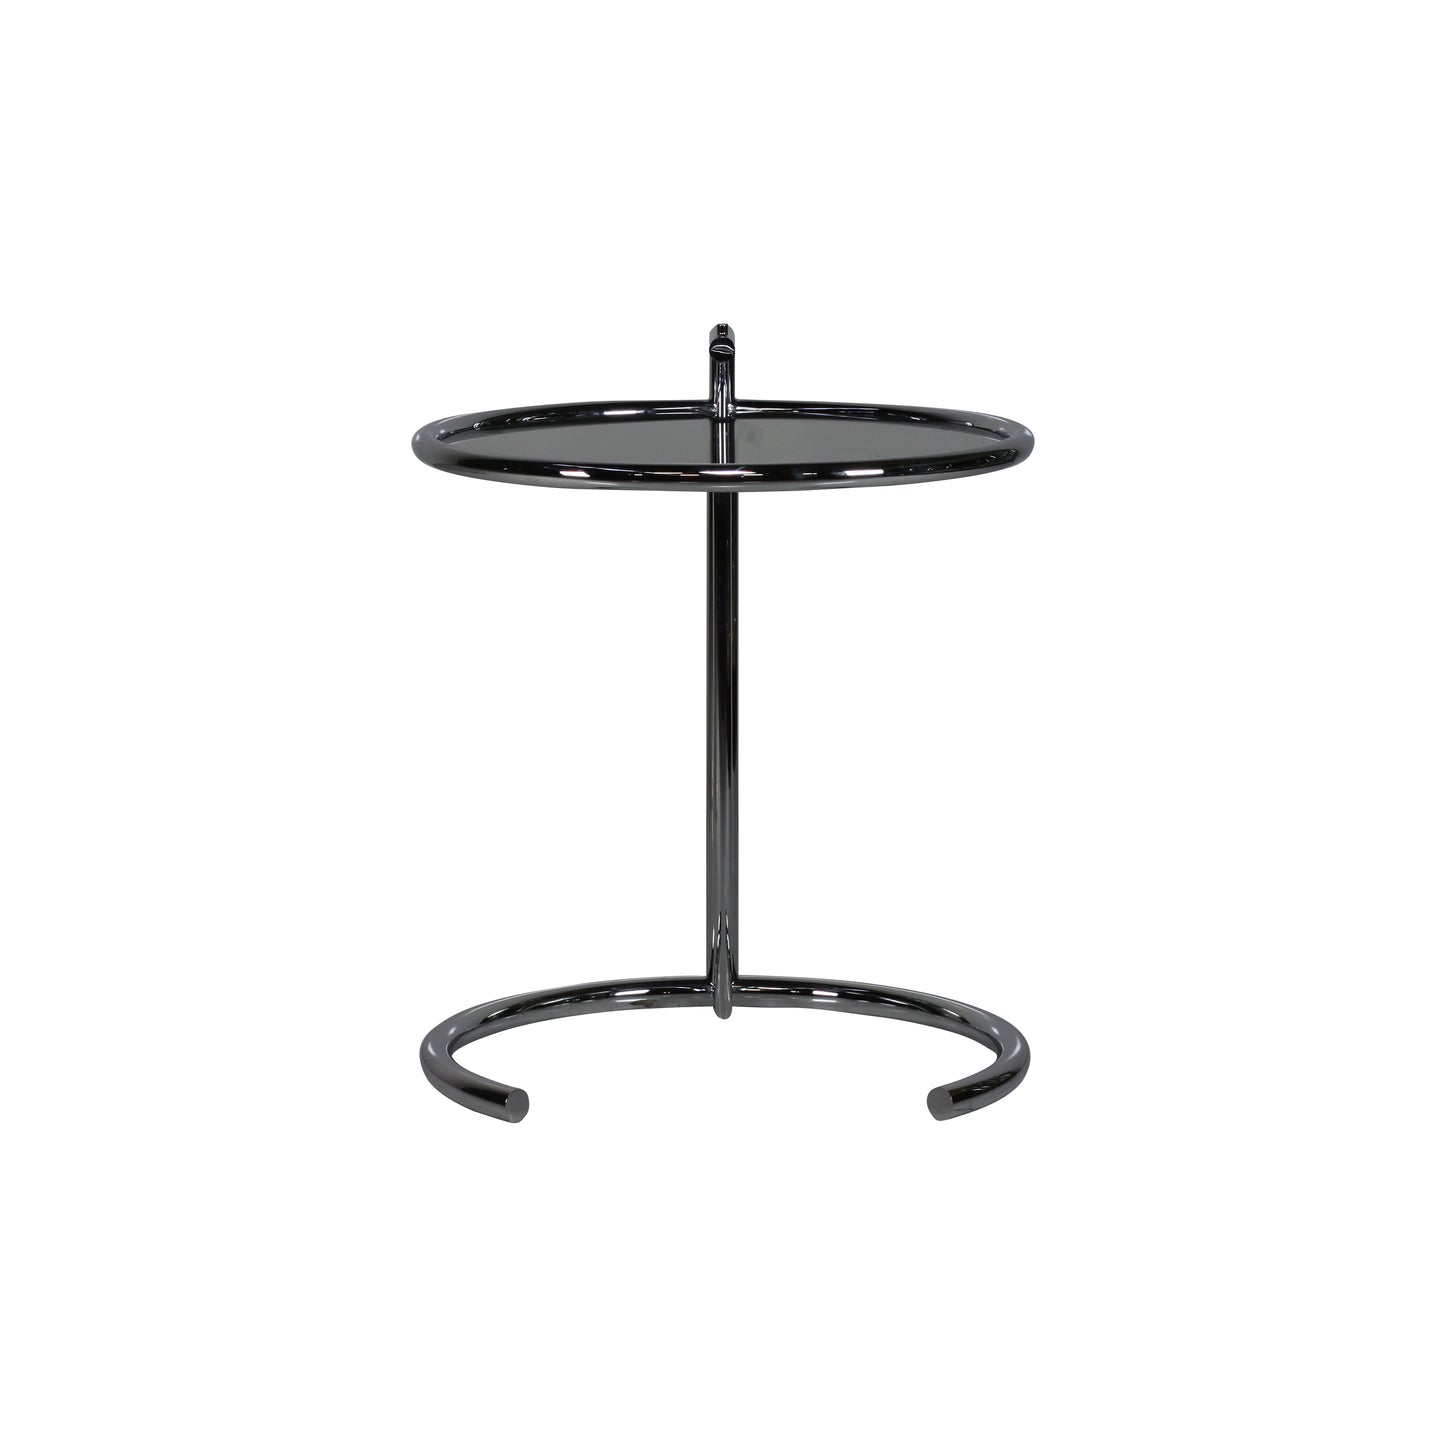 Adjustable table style | Black lacquered smoked glass | Front